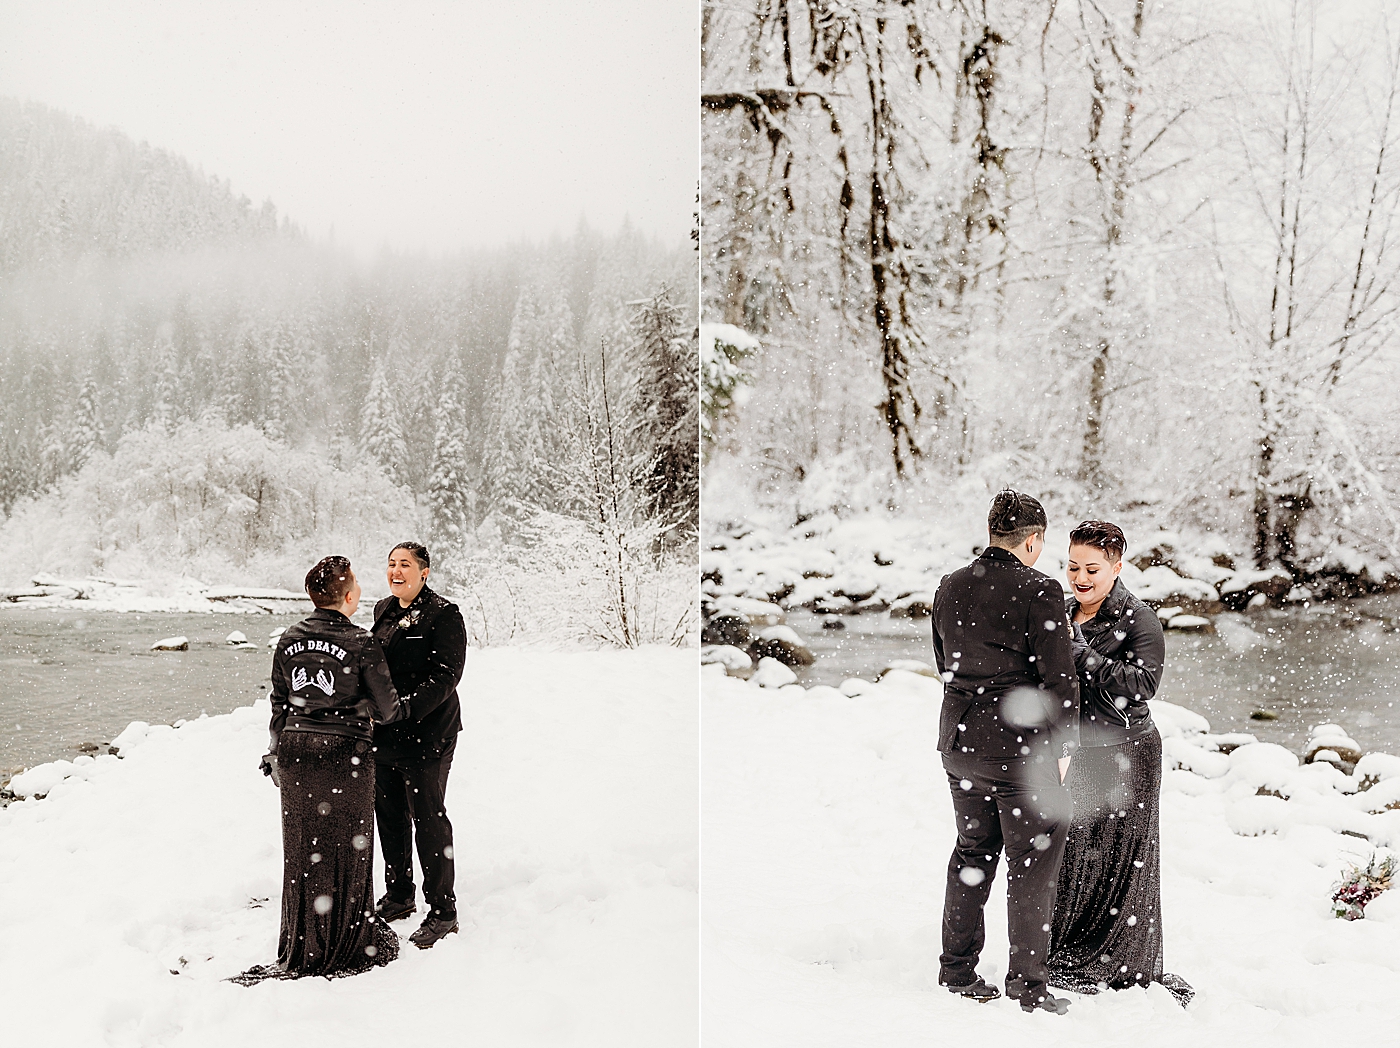 Vow exchange at Middle Fork bridge in the WA. Photo by Megan Montalvo Photography.